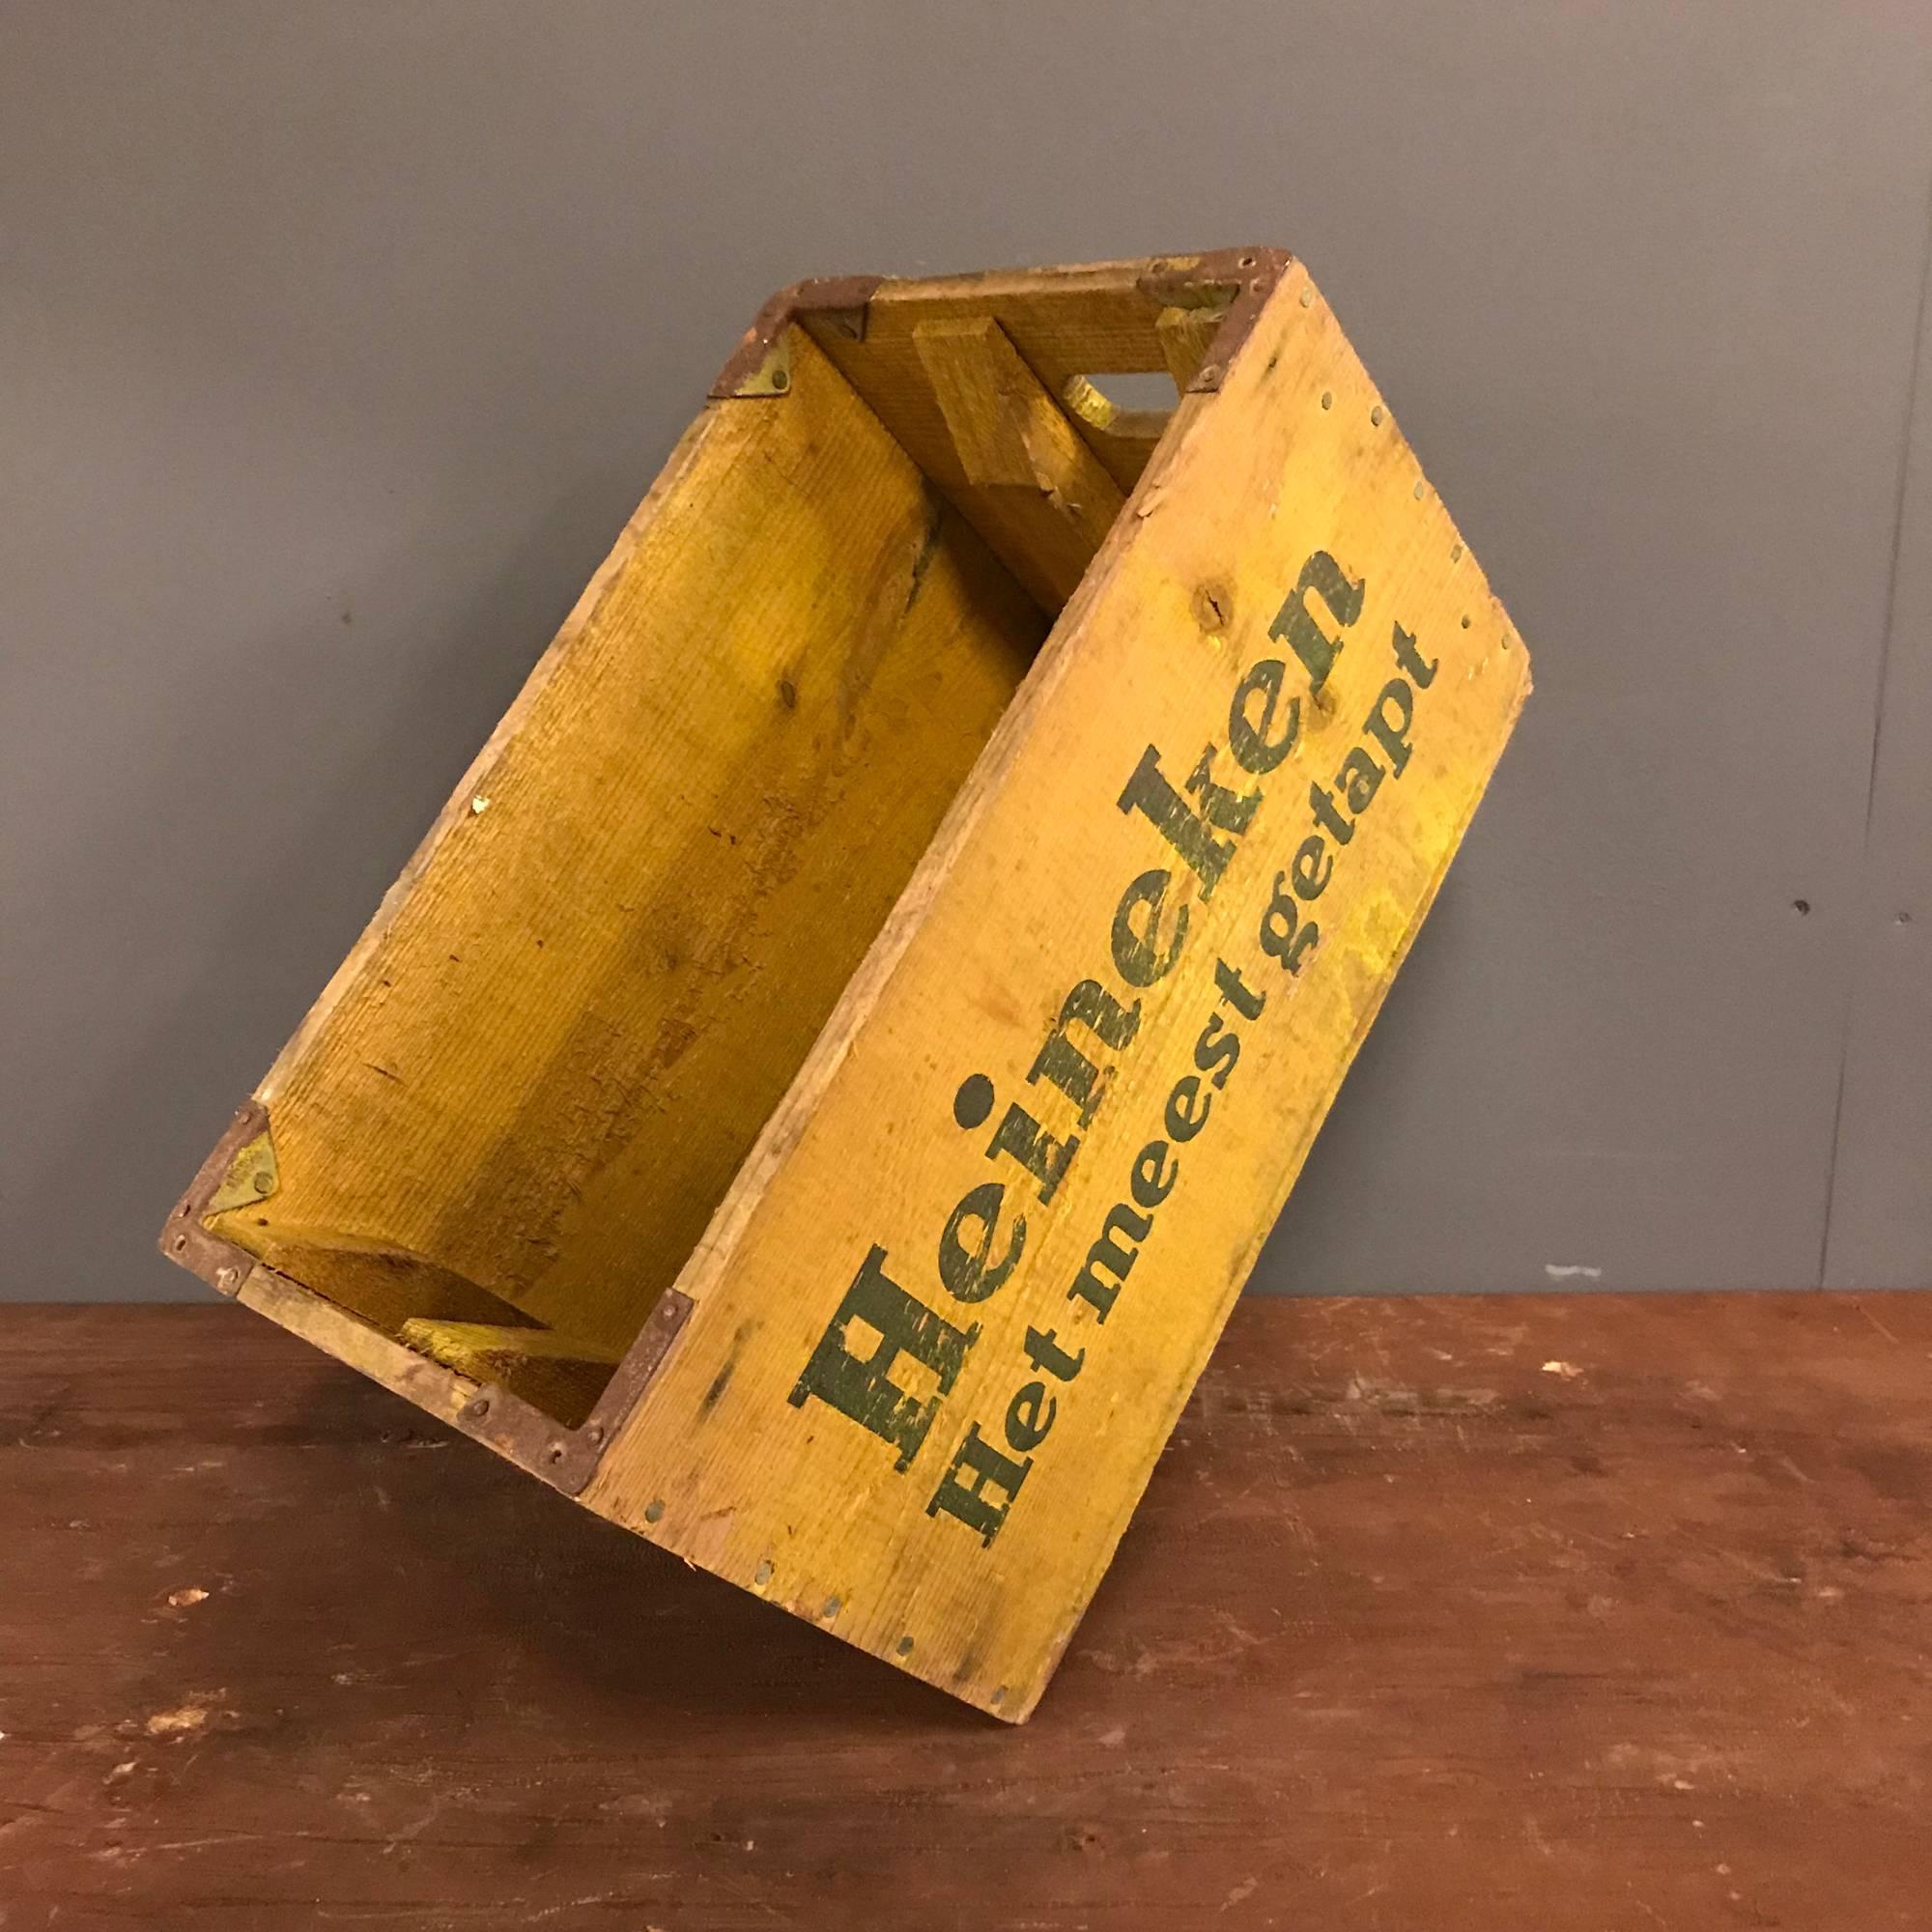 Vintage Dutch wooden beer crate. Made in Holland during the 1930s. Four crates available in different sizes: 45 x 26 x 23 cm. – 55.5 x 32.5 x 23 cm.
   